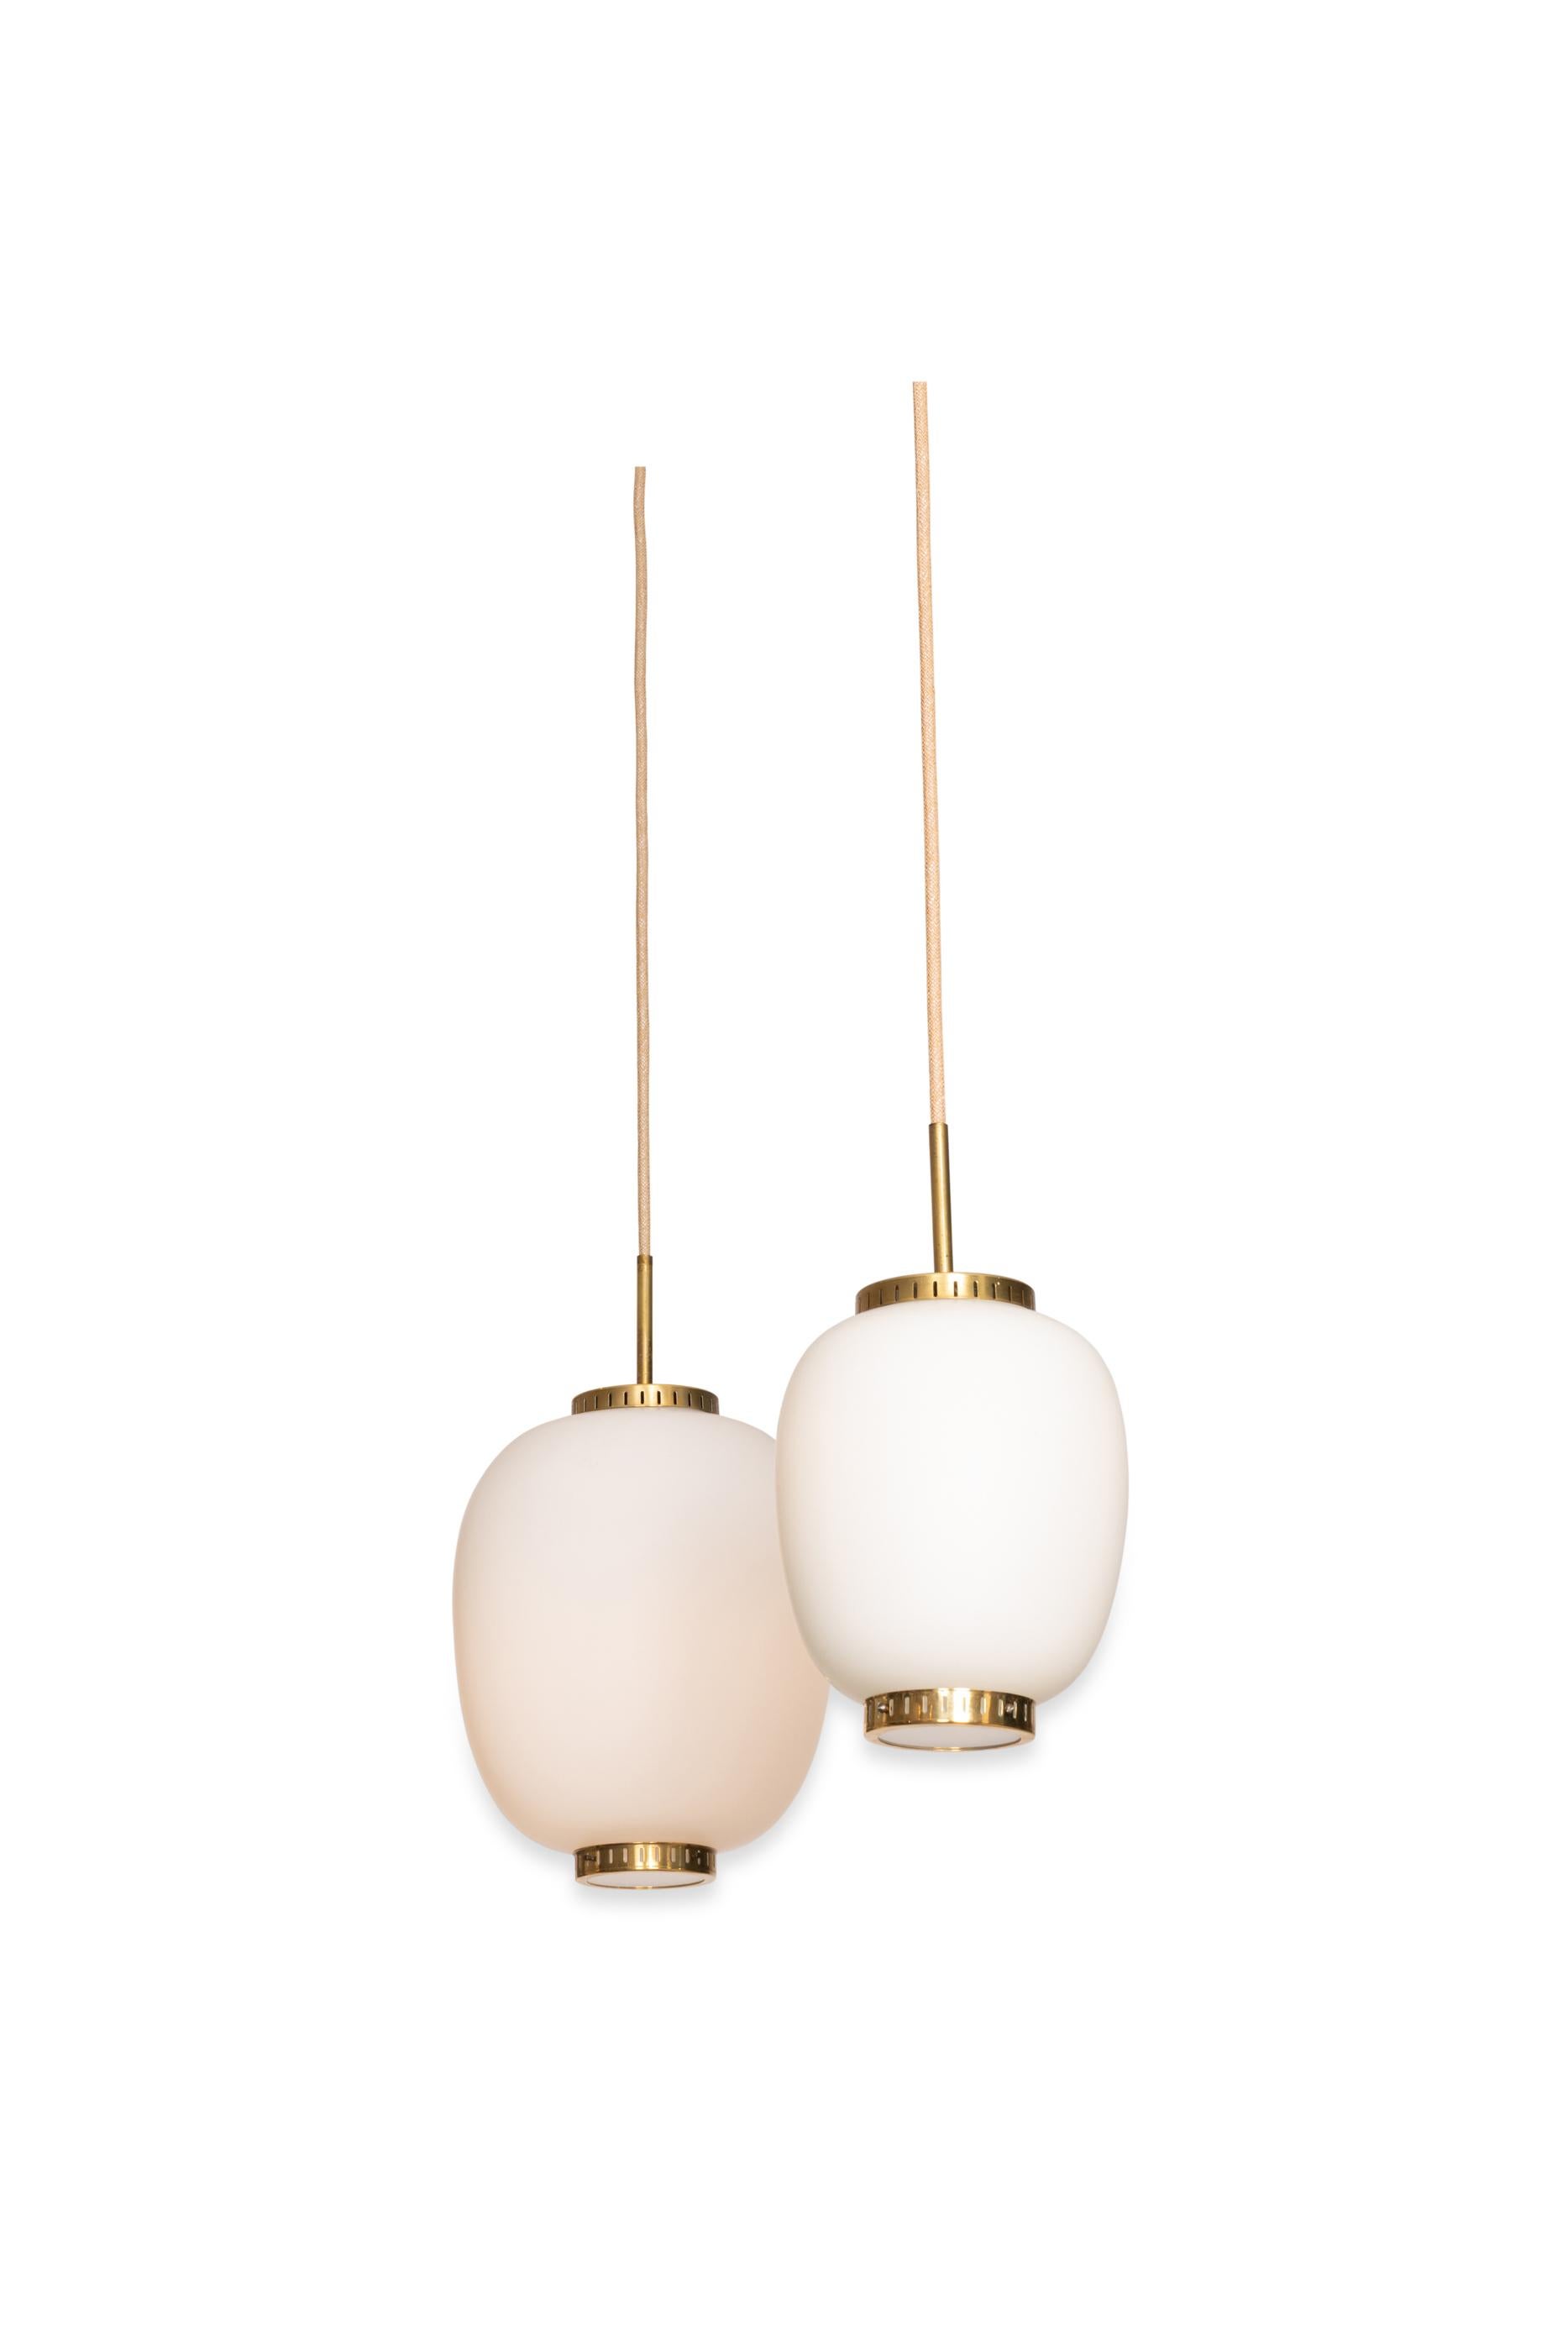 Collection of 9 Opaline Glass and Brass Ceiling Fixtures, Bent Karlby for Lyfa 2